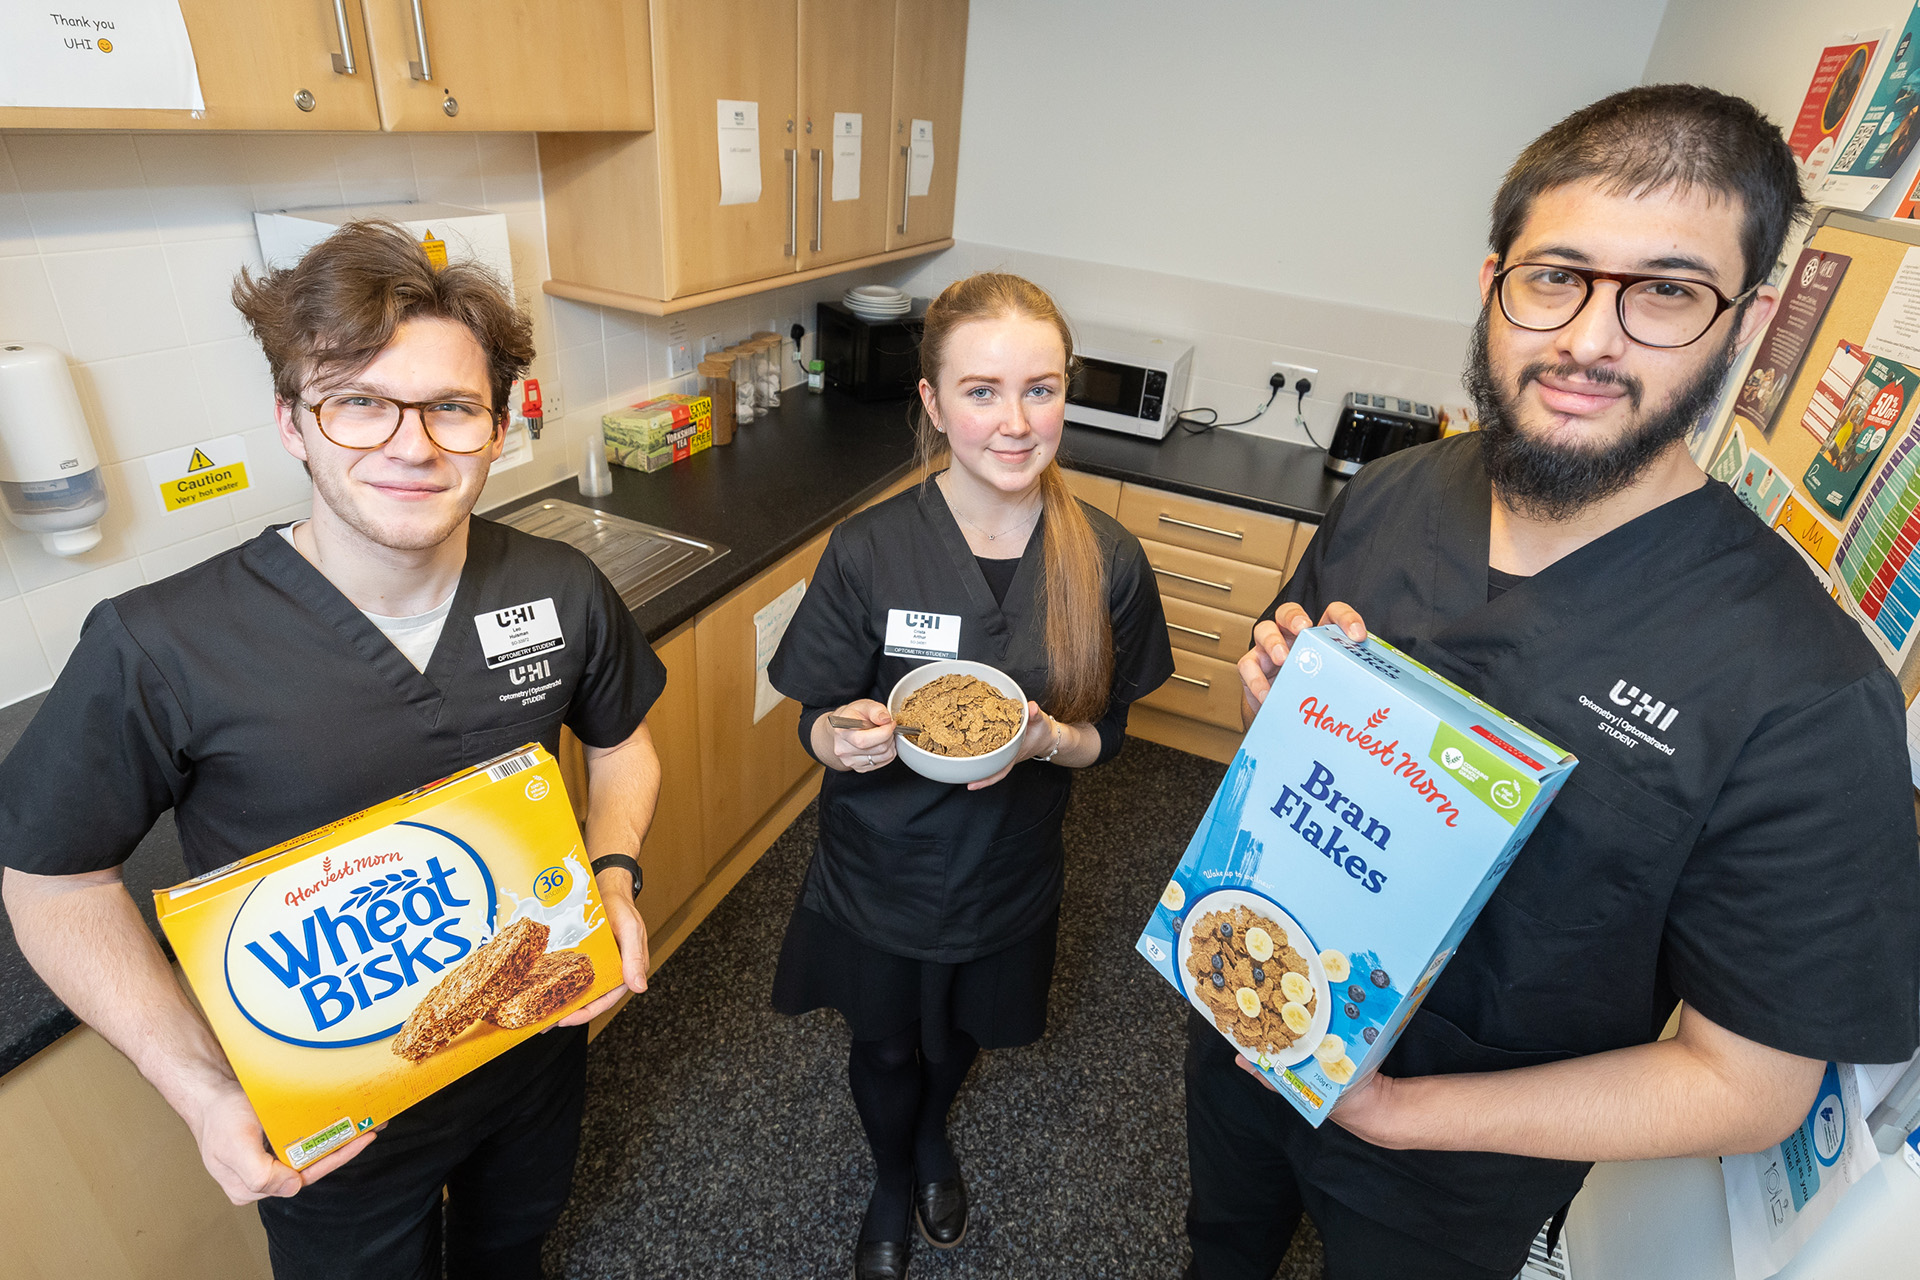 Specsavers donation provides free meals to UHI students